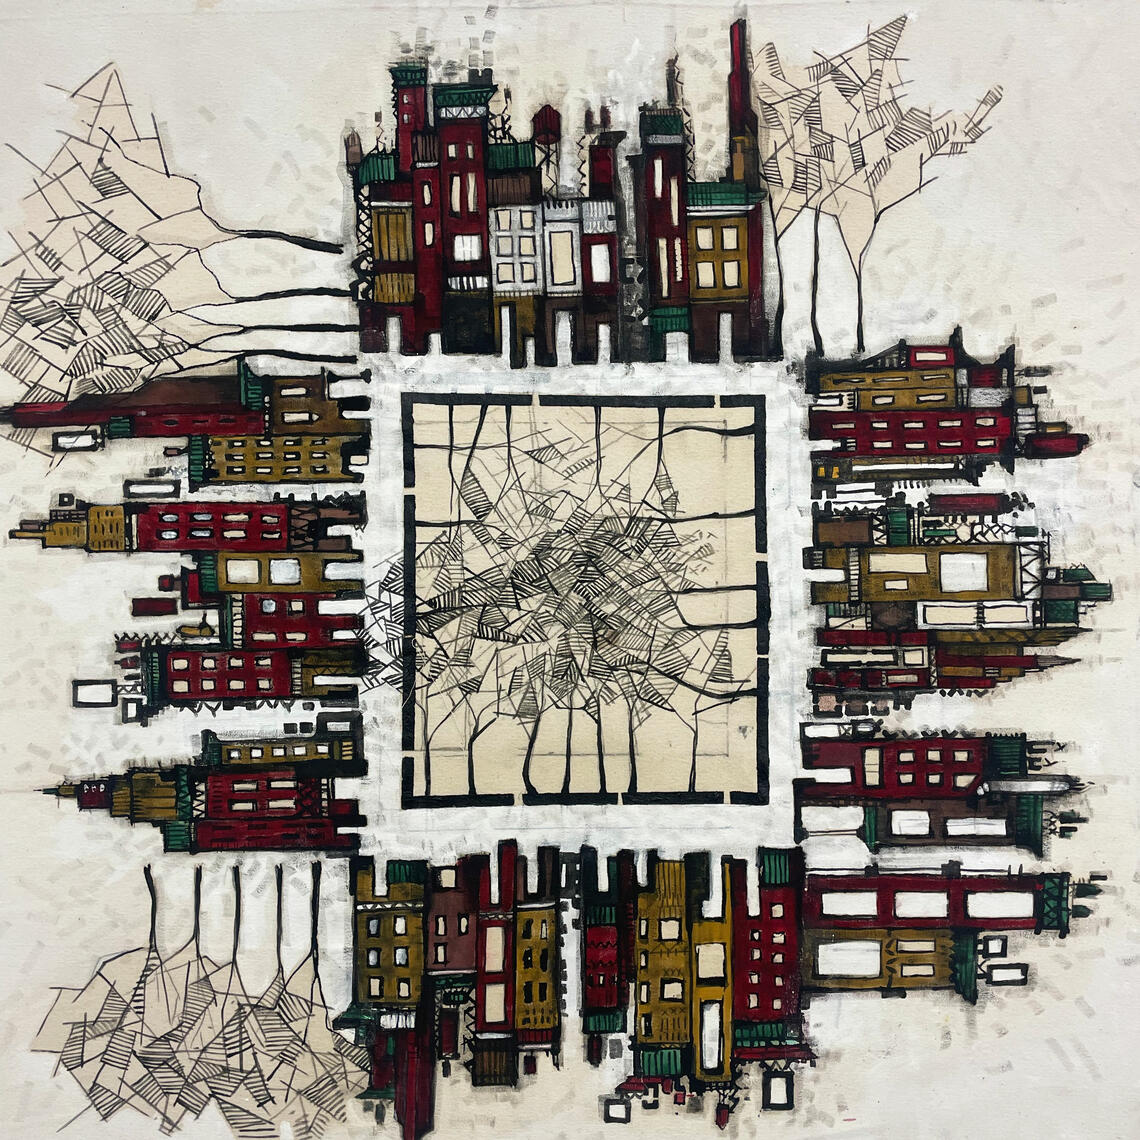 Landscape Drawing - A square in the middle with drawings of skyscrapers on each side